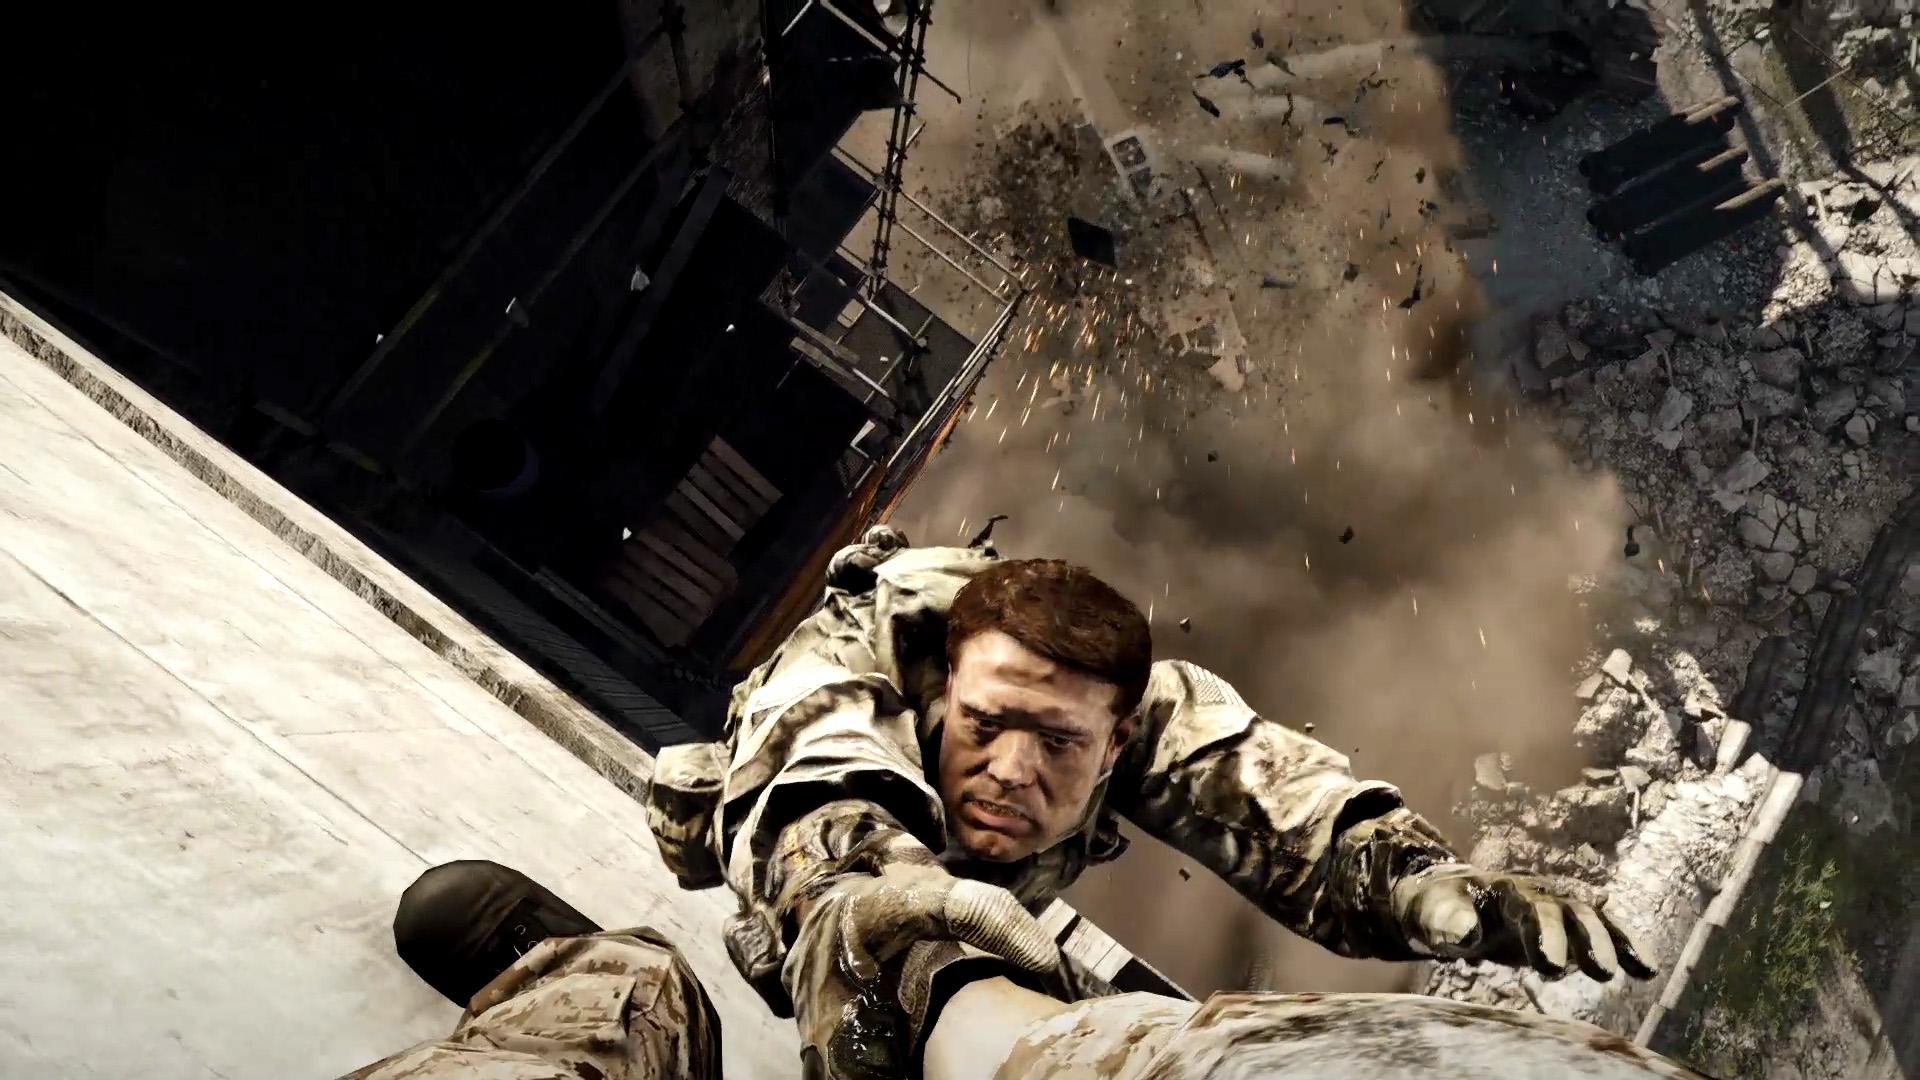 S&S; News: Battlefield 4 PC will be optimised for AMD components